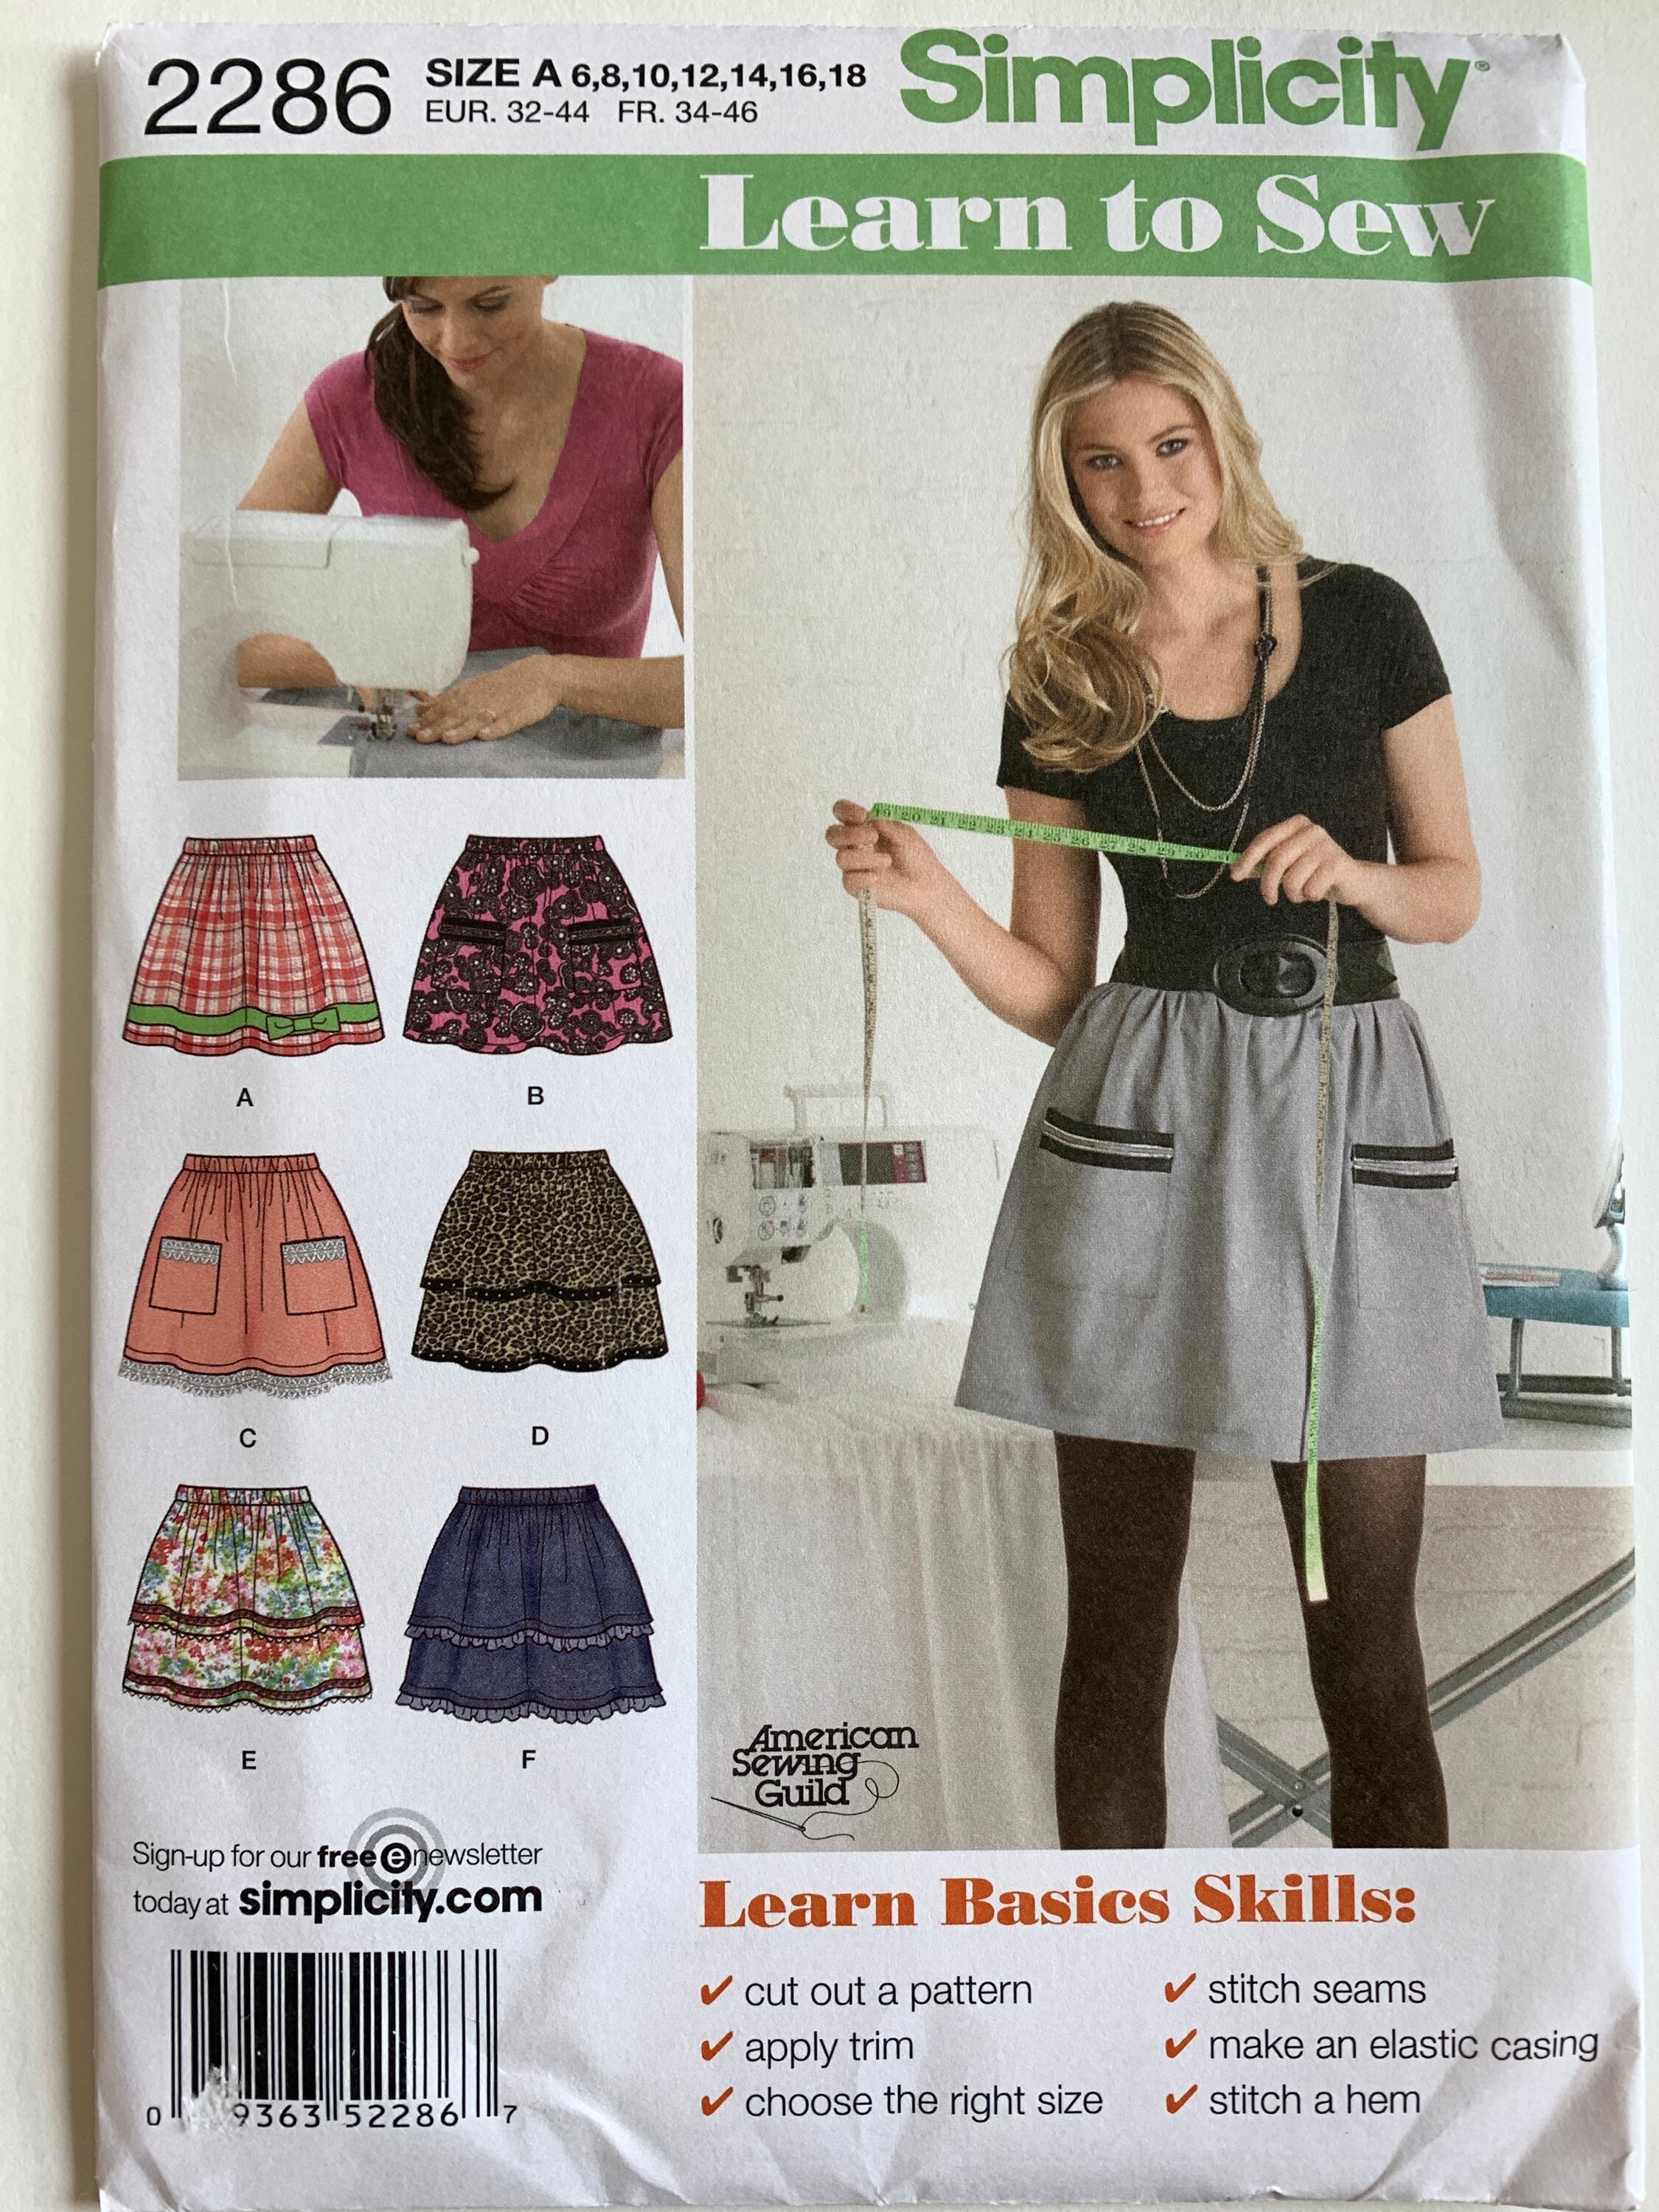 Misses Pull On Skirt Trim Variations Simplicity Learn to Sew Pattern 2286 sizes 6 8 10 12 14 16 18 UNCUT